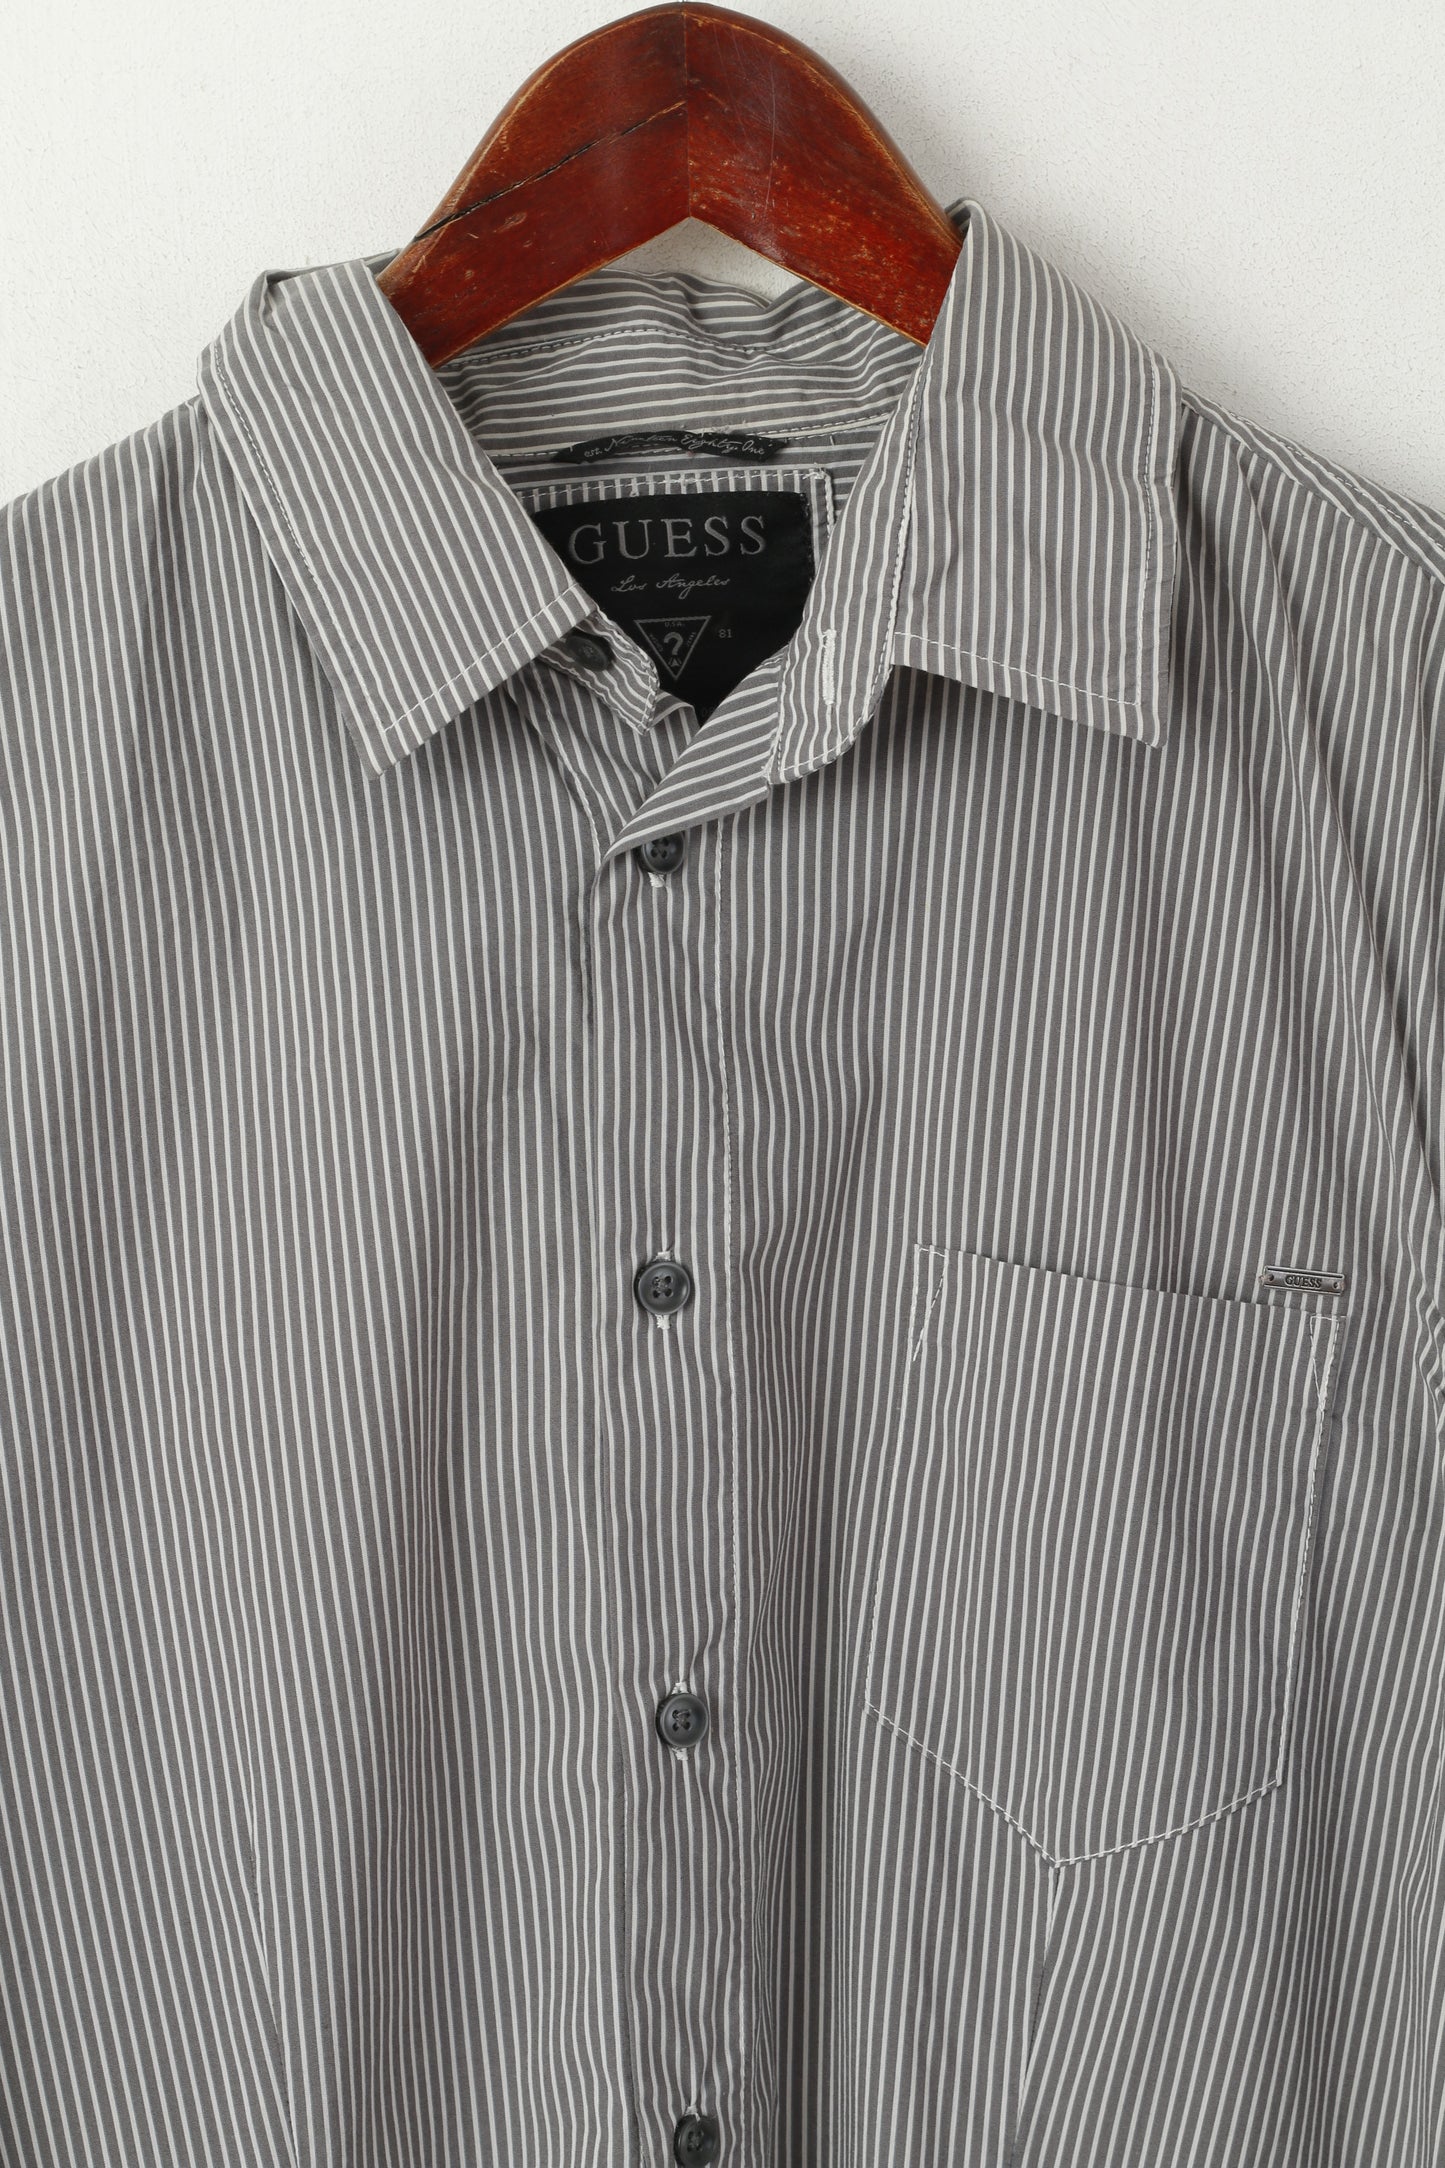 Guess Men M Casual Shirt Gray Striped Cotton Stretch Long Sleeve Pocket Top